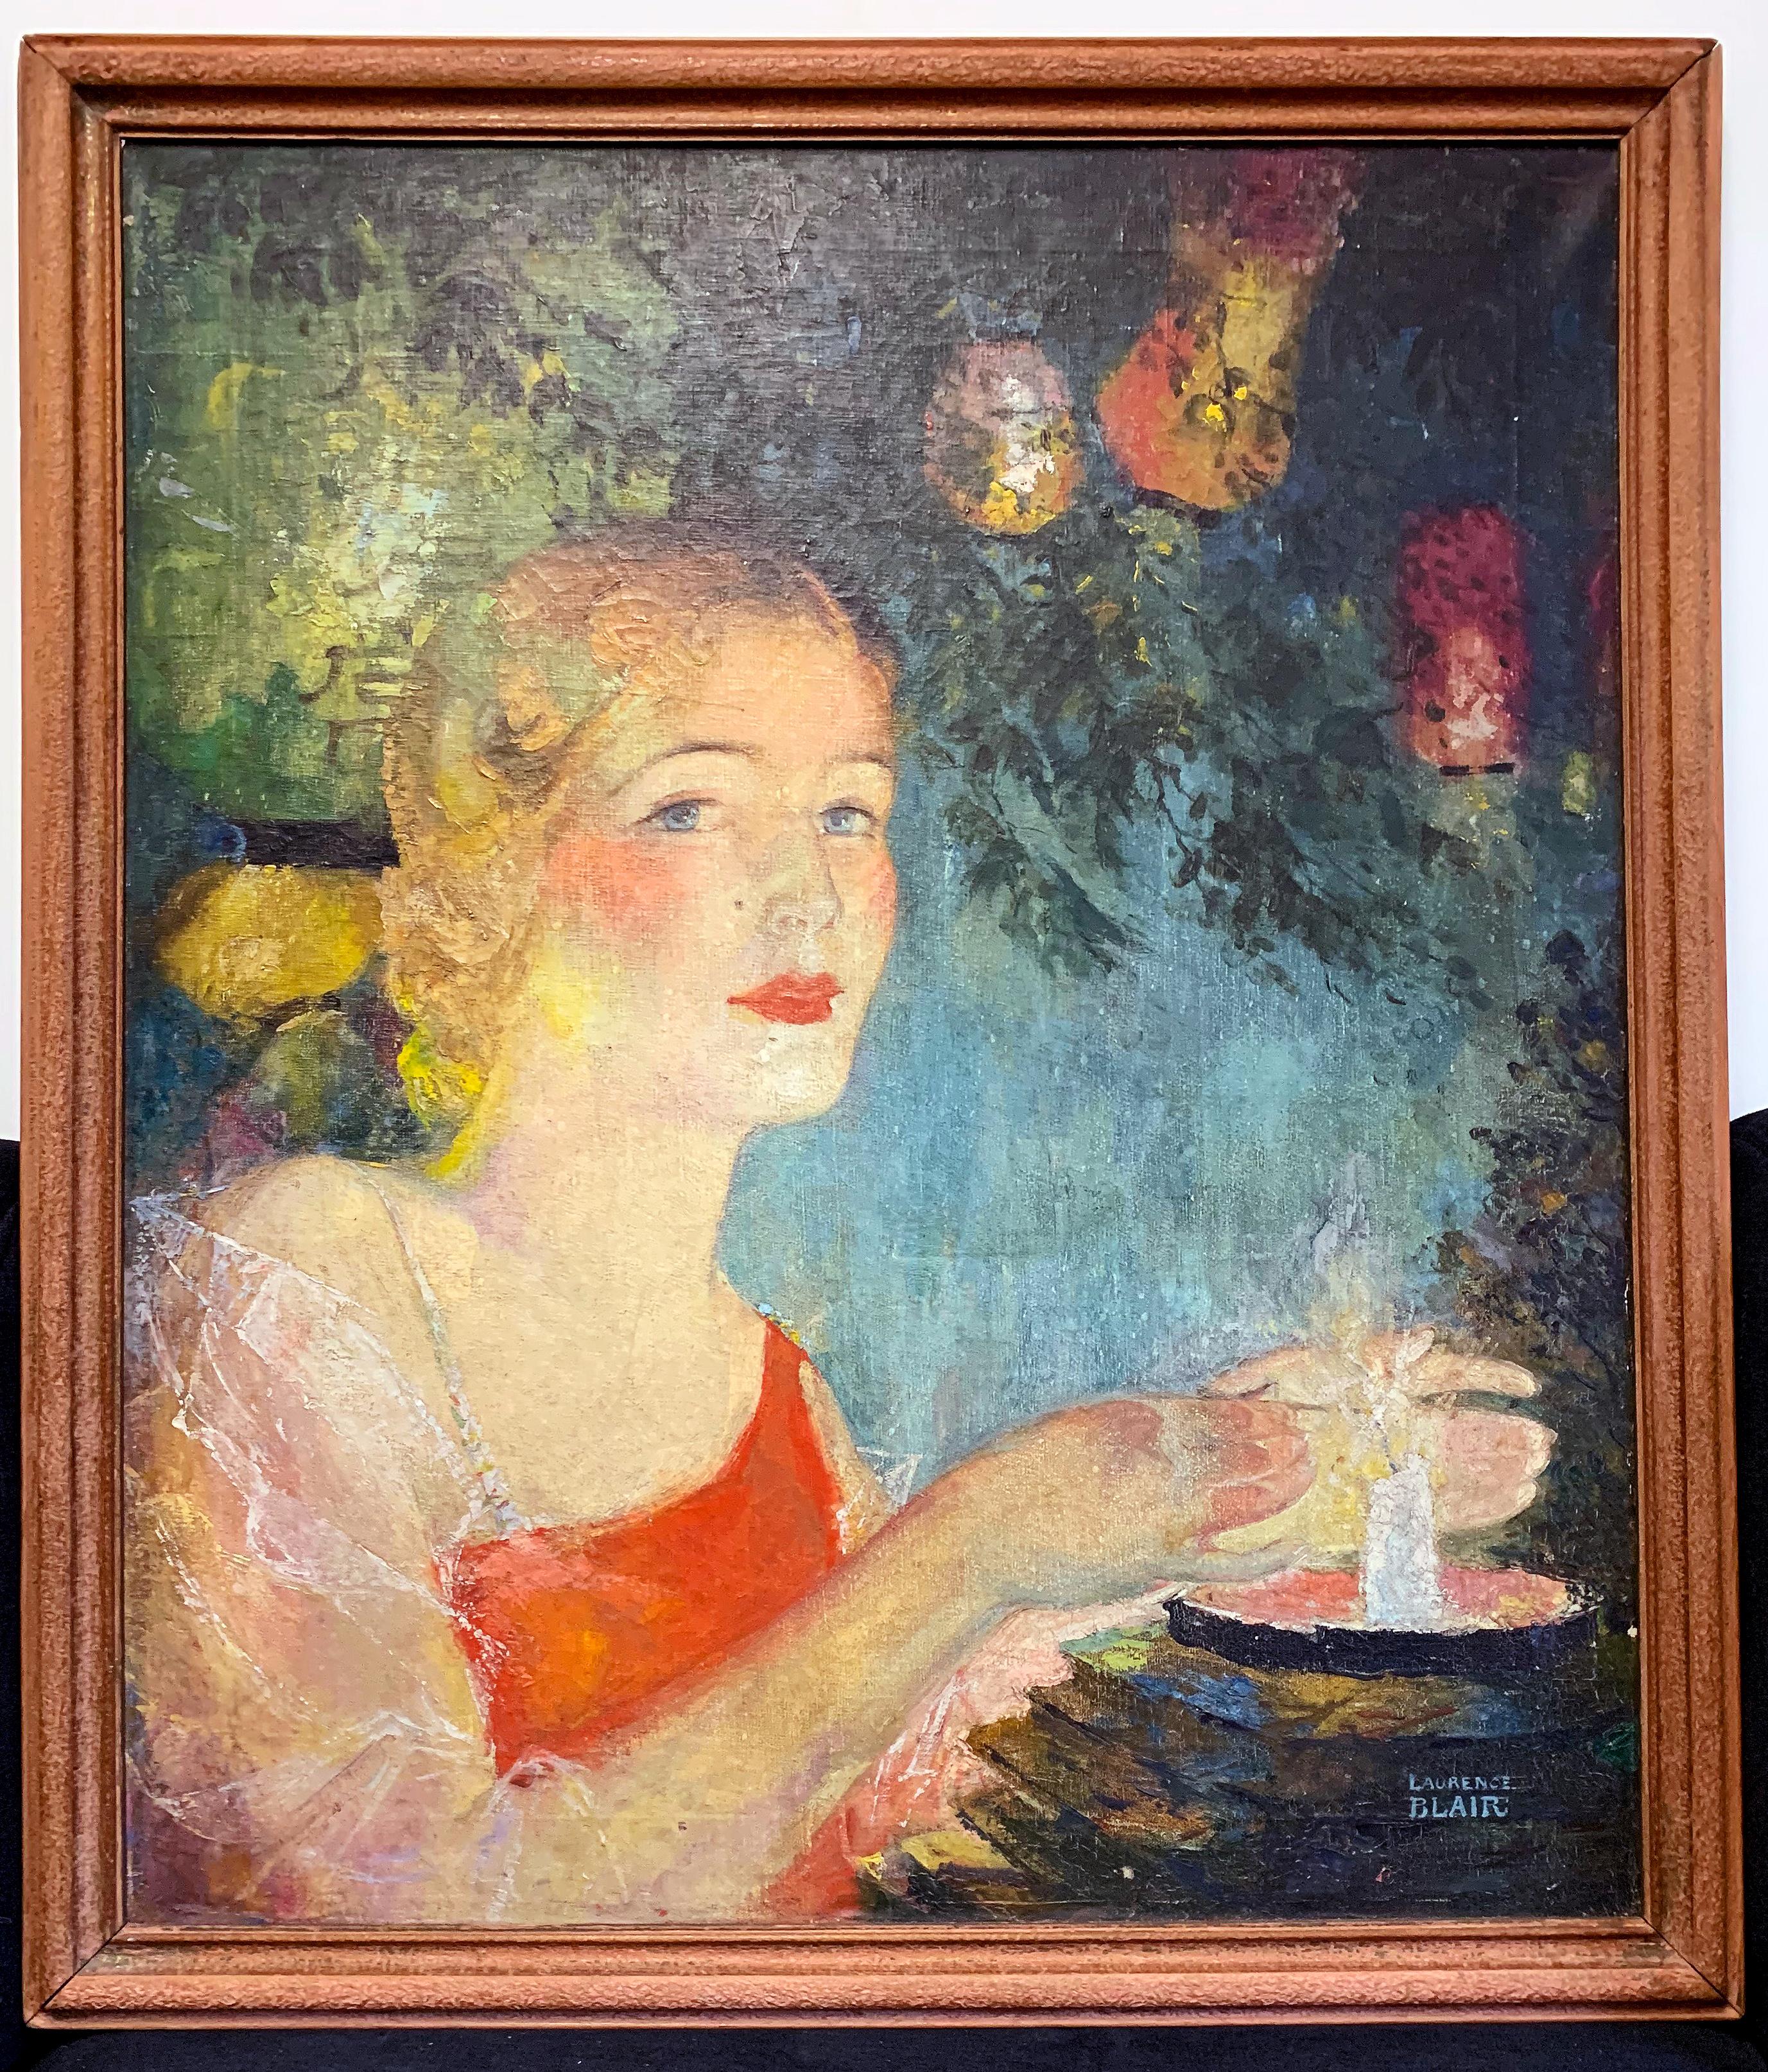 Suffused with atmospheric light and rich colors, this delightful painting of a young woman lighting a candle and surrounded by a cloud of Japanese paper lanterns, was painted by Laurence Blair, a New Jersey artist, in the 1920s. The woman's blue